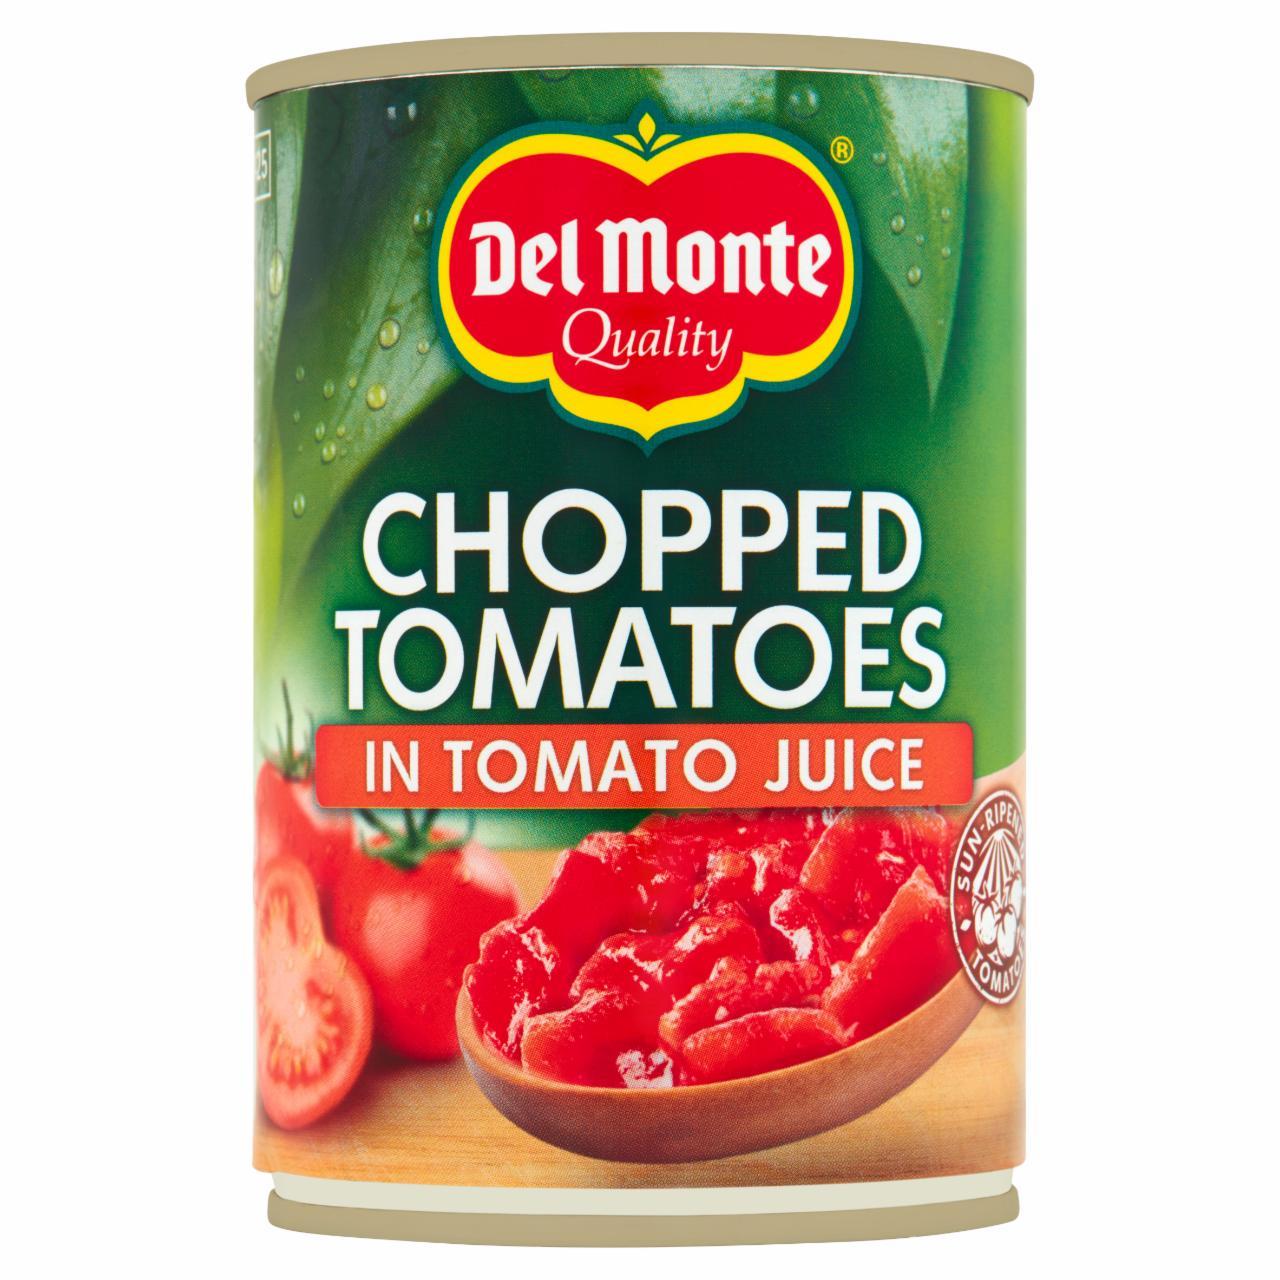 Fotografie - Chopped tomatoes in Tomato Juice Del Monte Quality